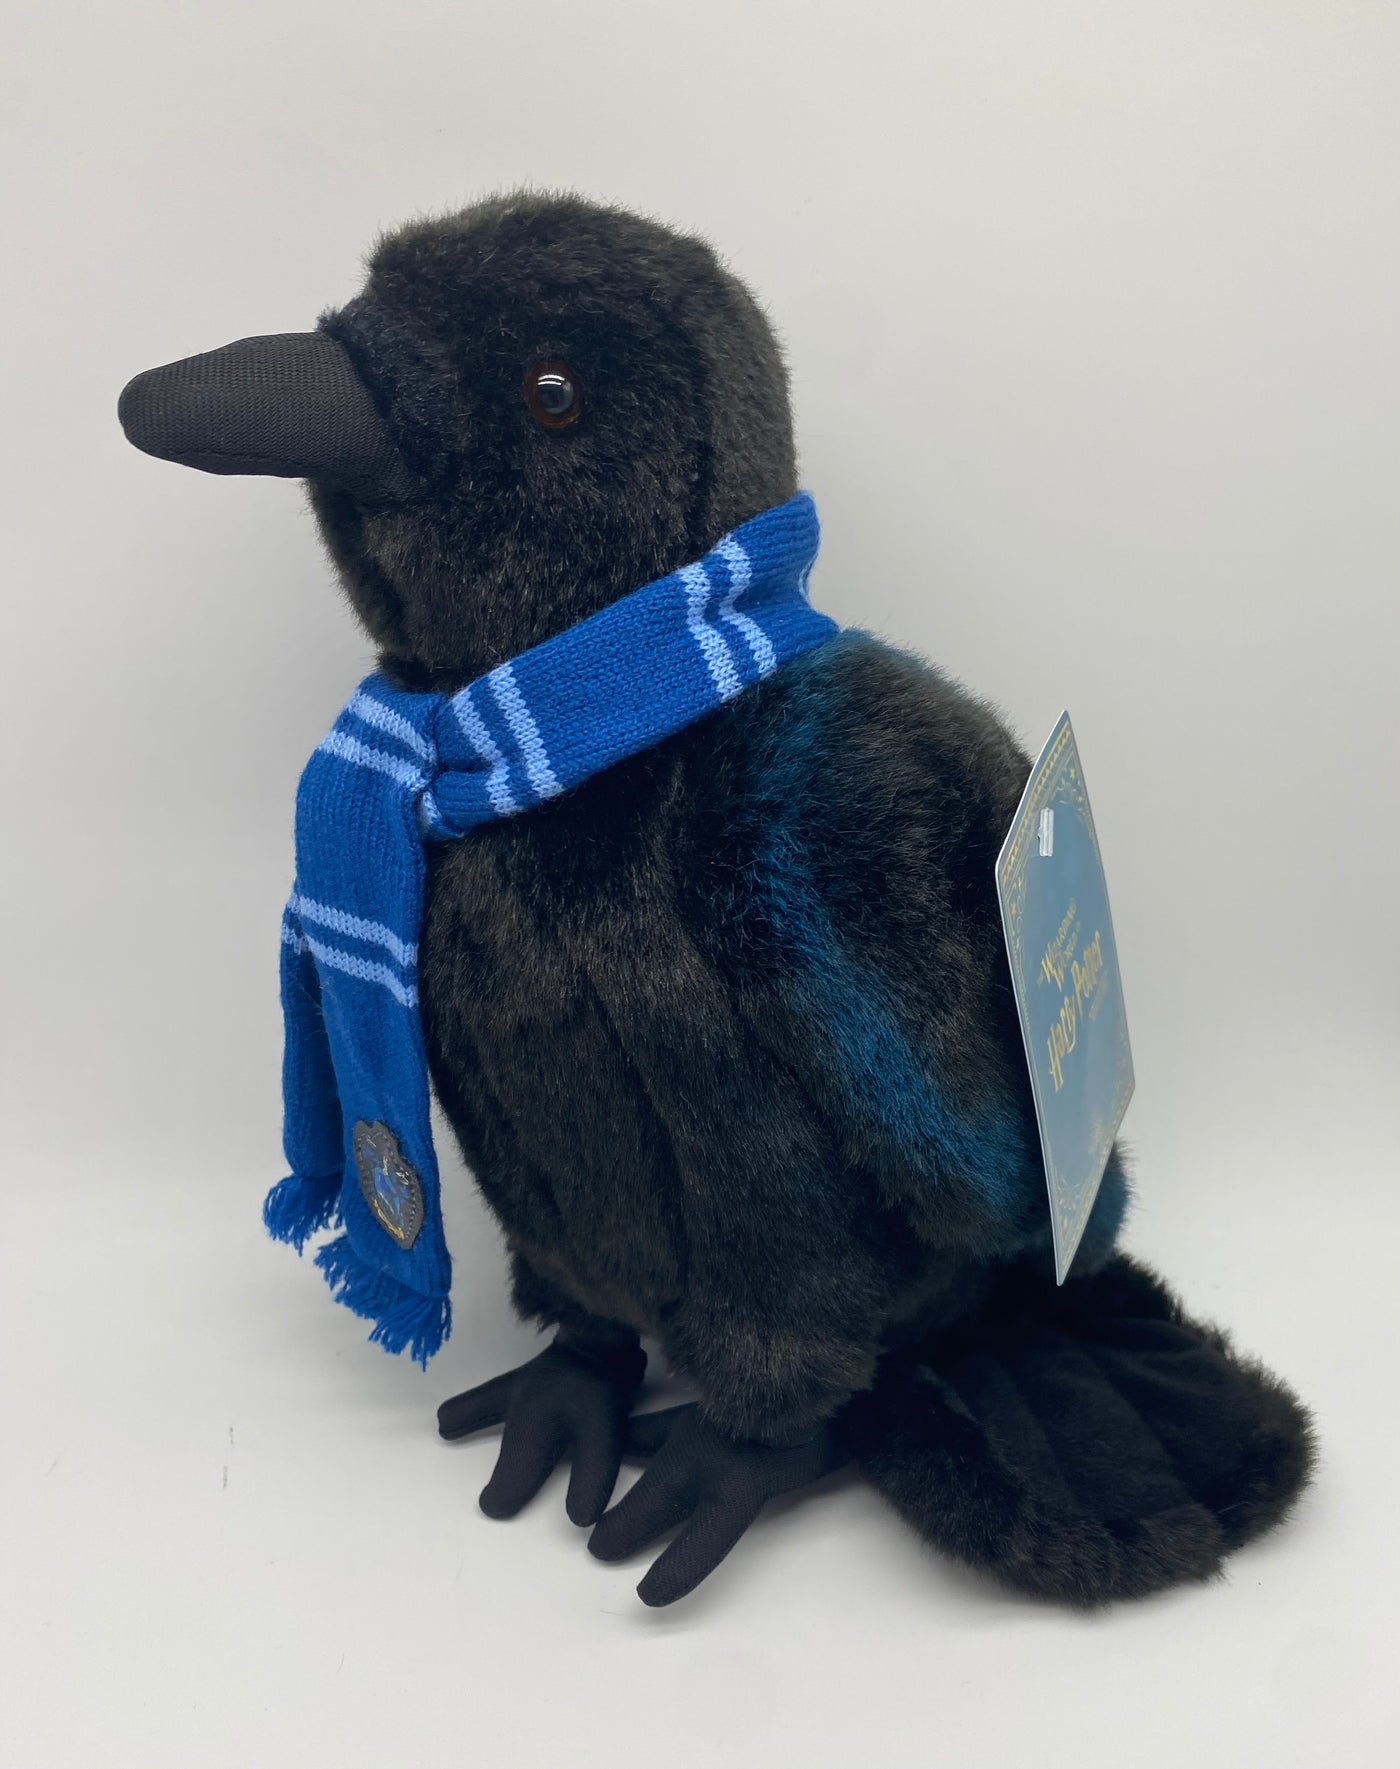 Universal Studios Harry Potter Ravenclaw Raven Mascot Plush New with Tag